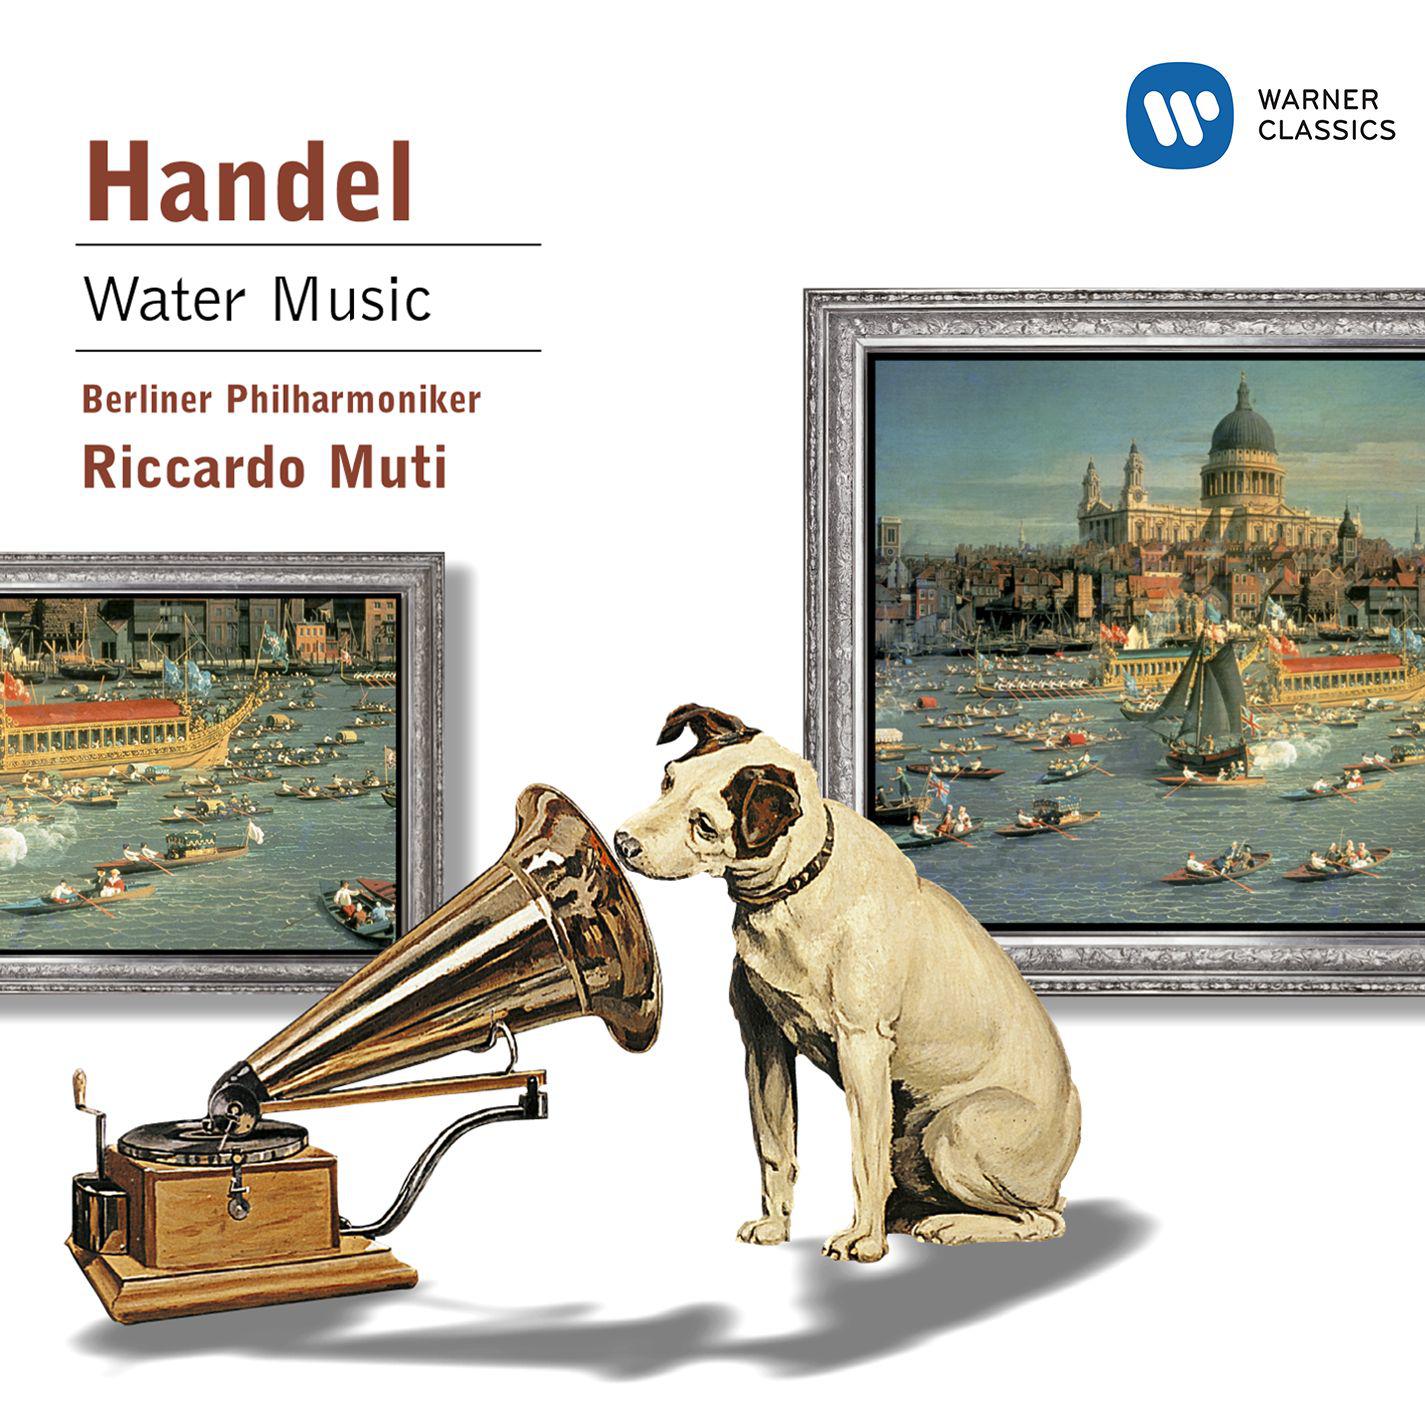 Water Music, Suite No. 1 in F Major, HWV 348:I. Overture